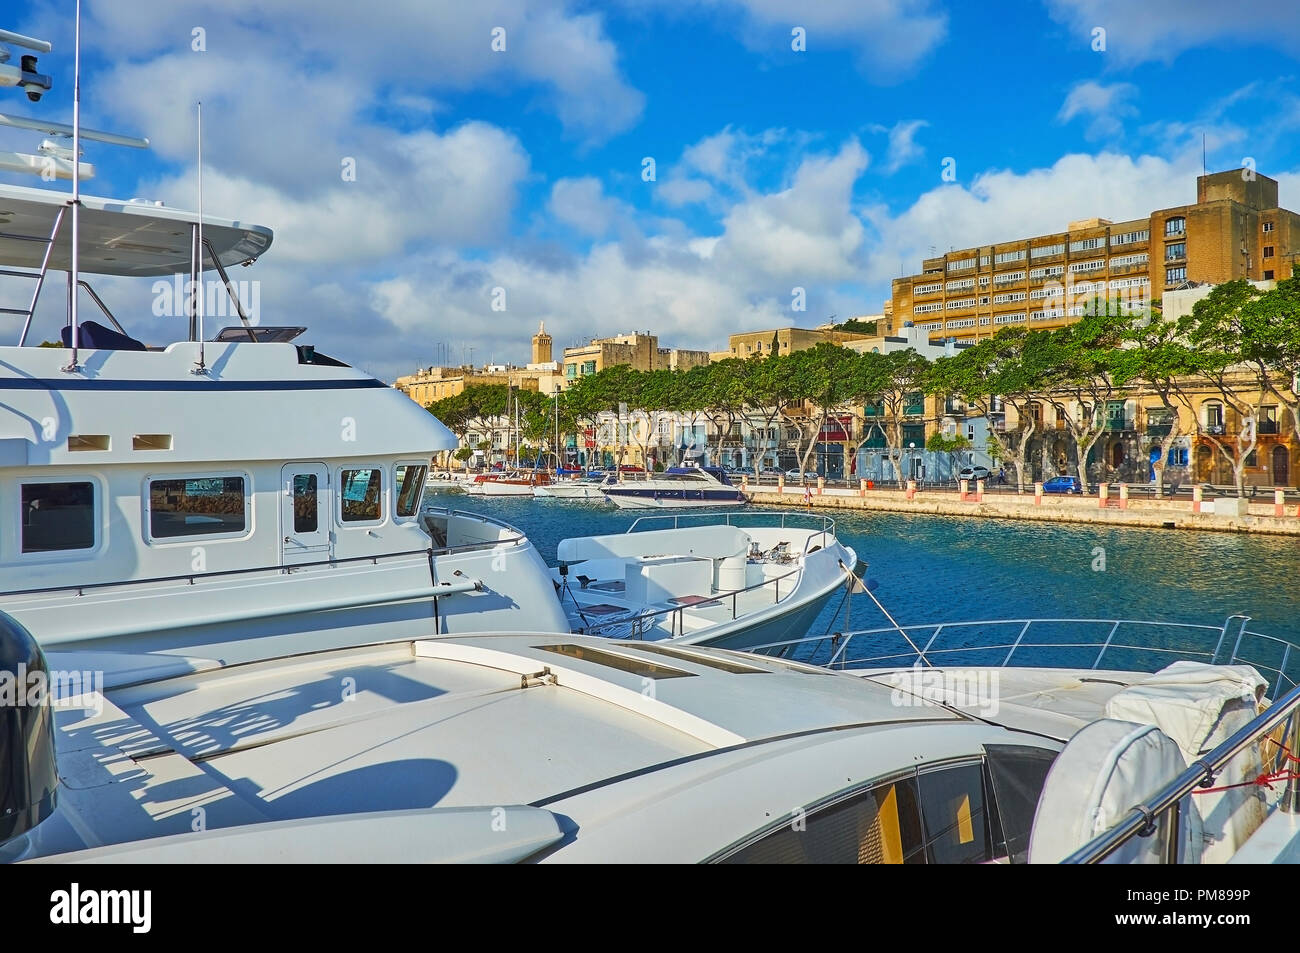 The yachts in marina of Valletta are perfect place to observe small towns on seashores, such as Ta'Xbiex with green pines along the seaside promenade, Stock Photo